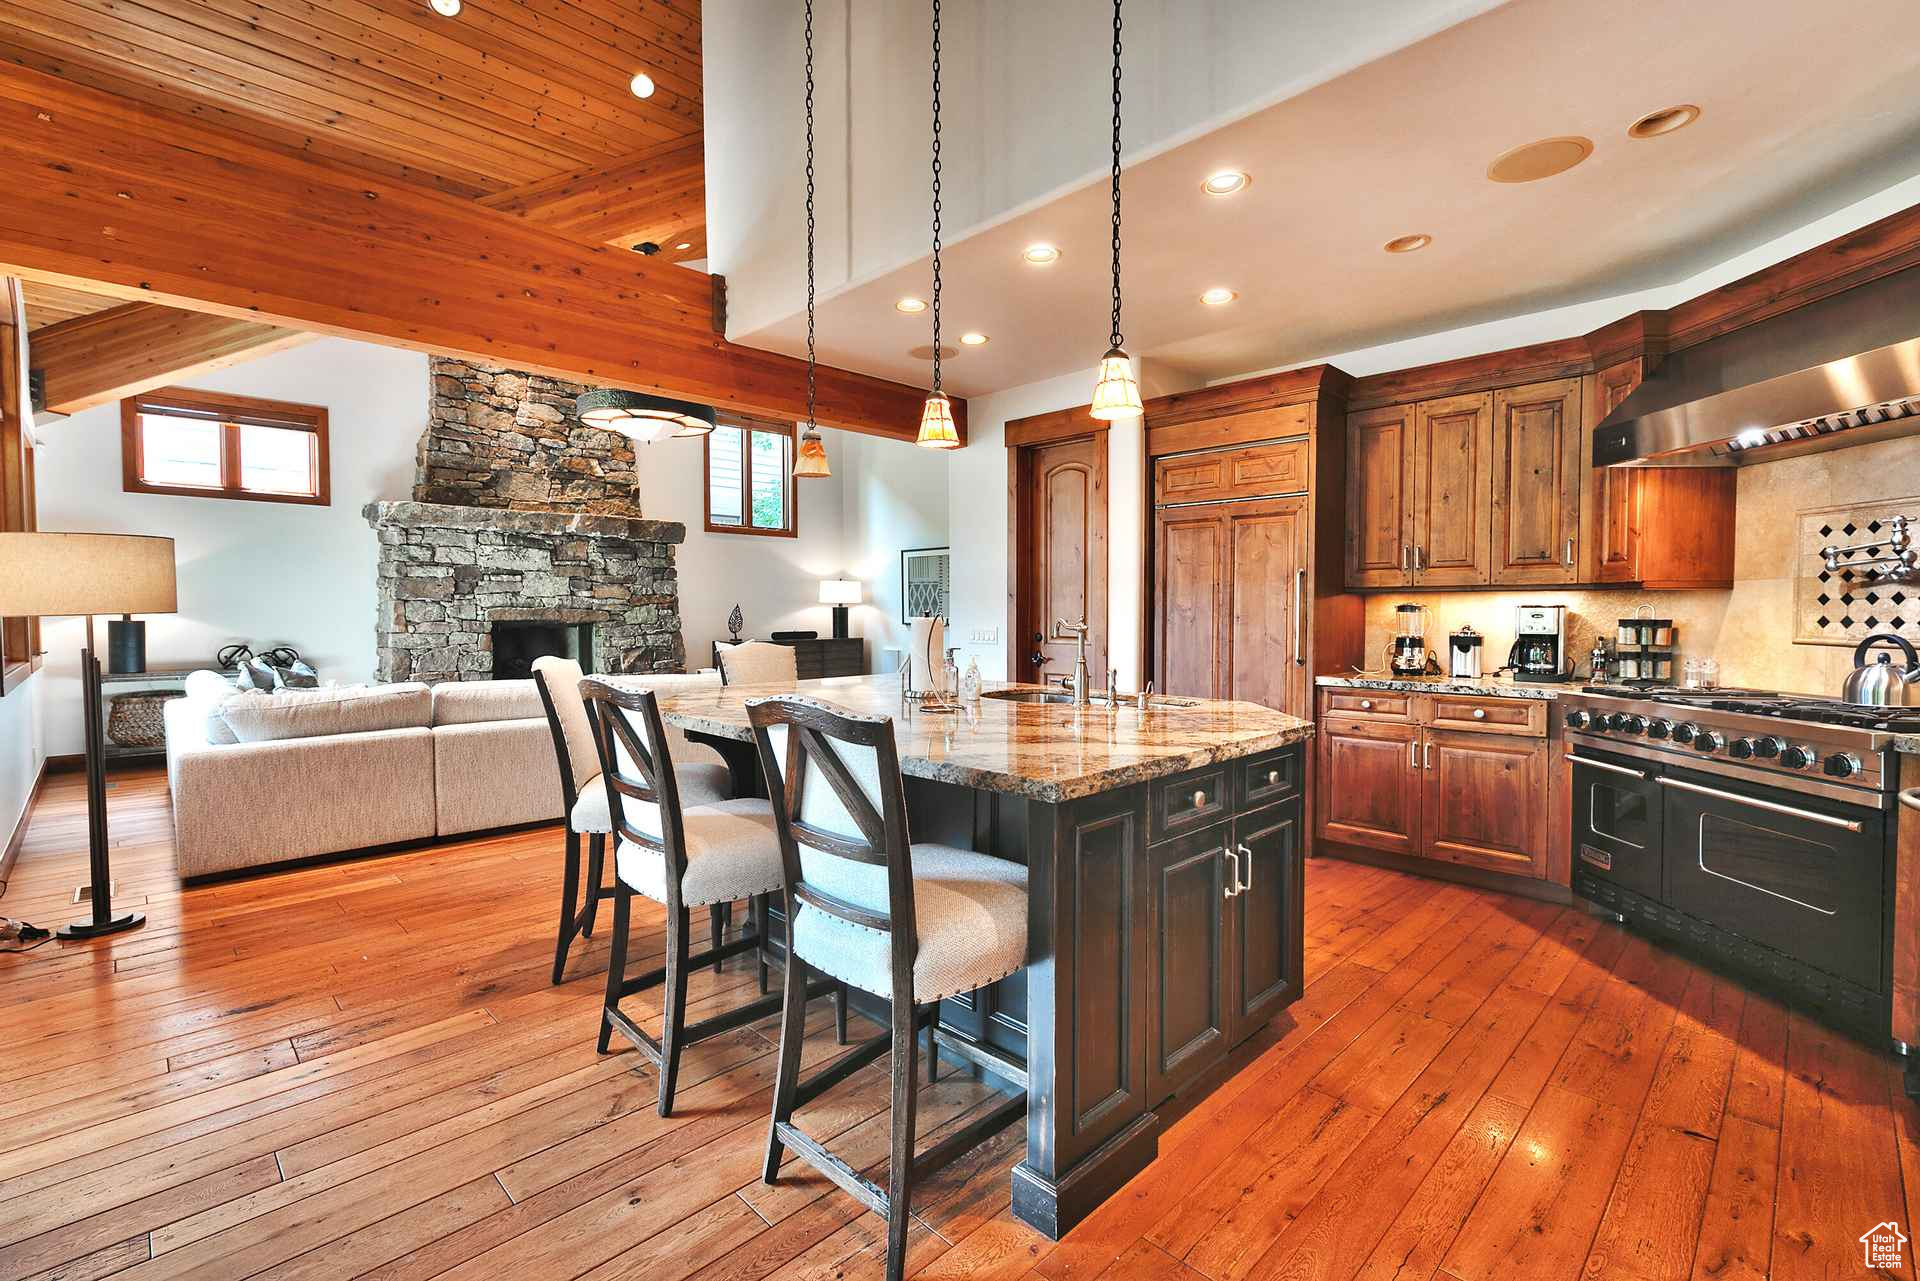 Kitchen featuring a fireplace, a breakfast bar, double oven range, wood-type flooring, and light stone countertops